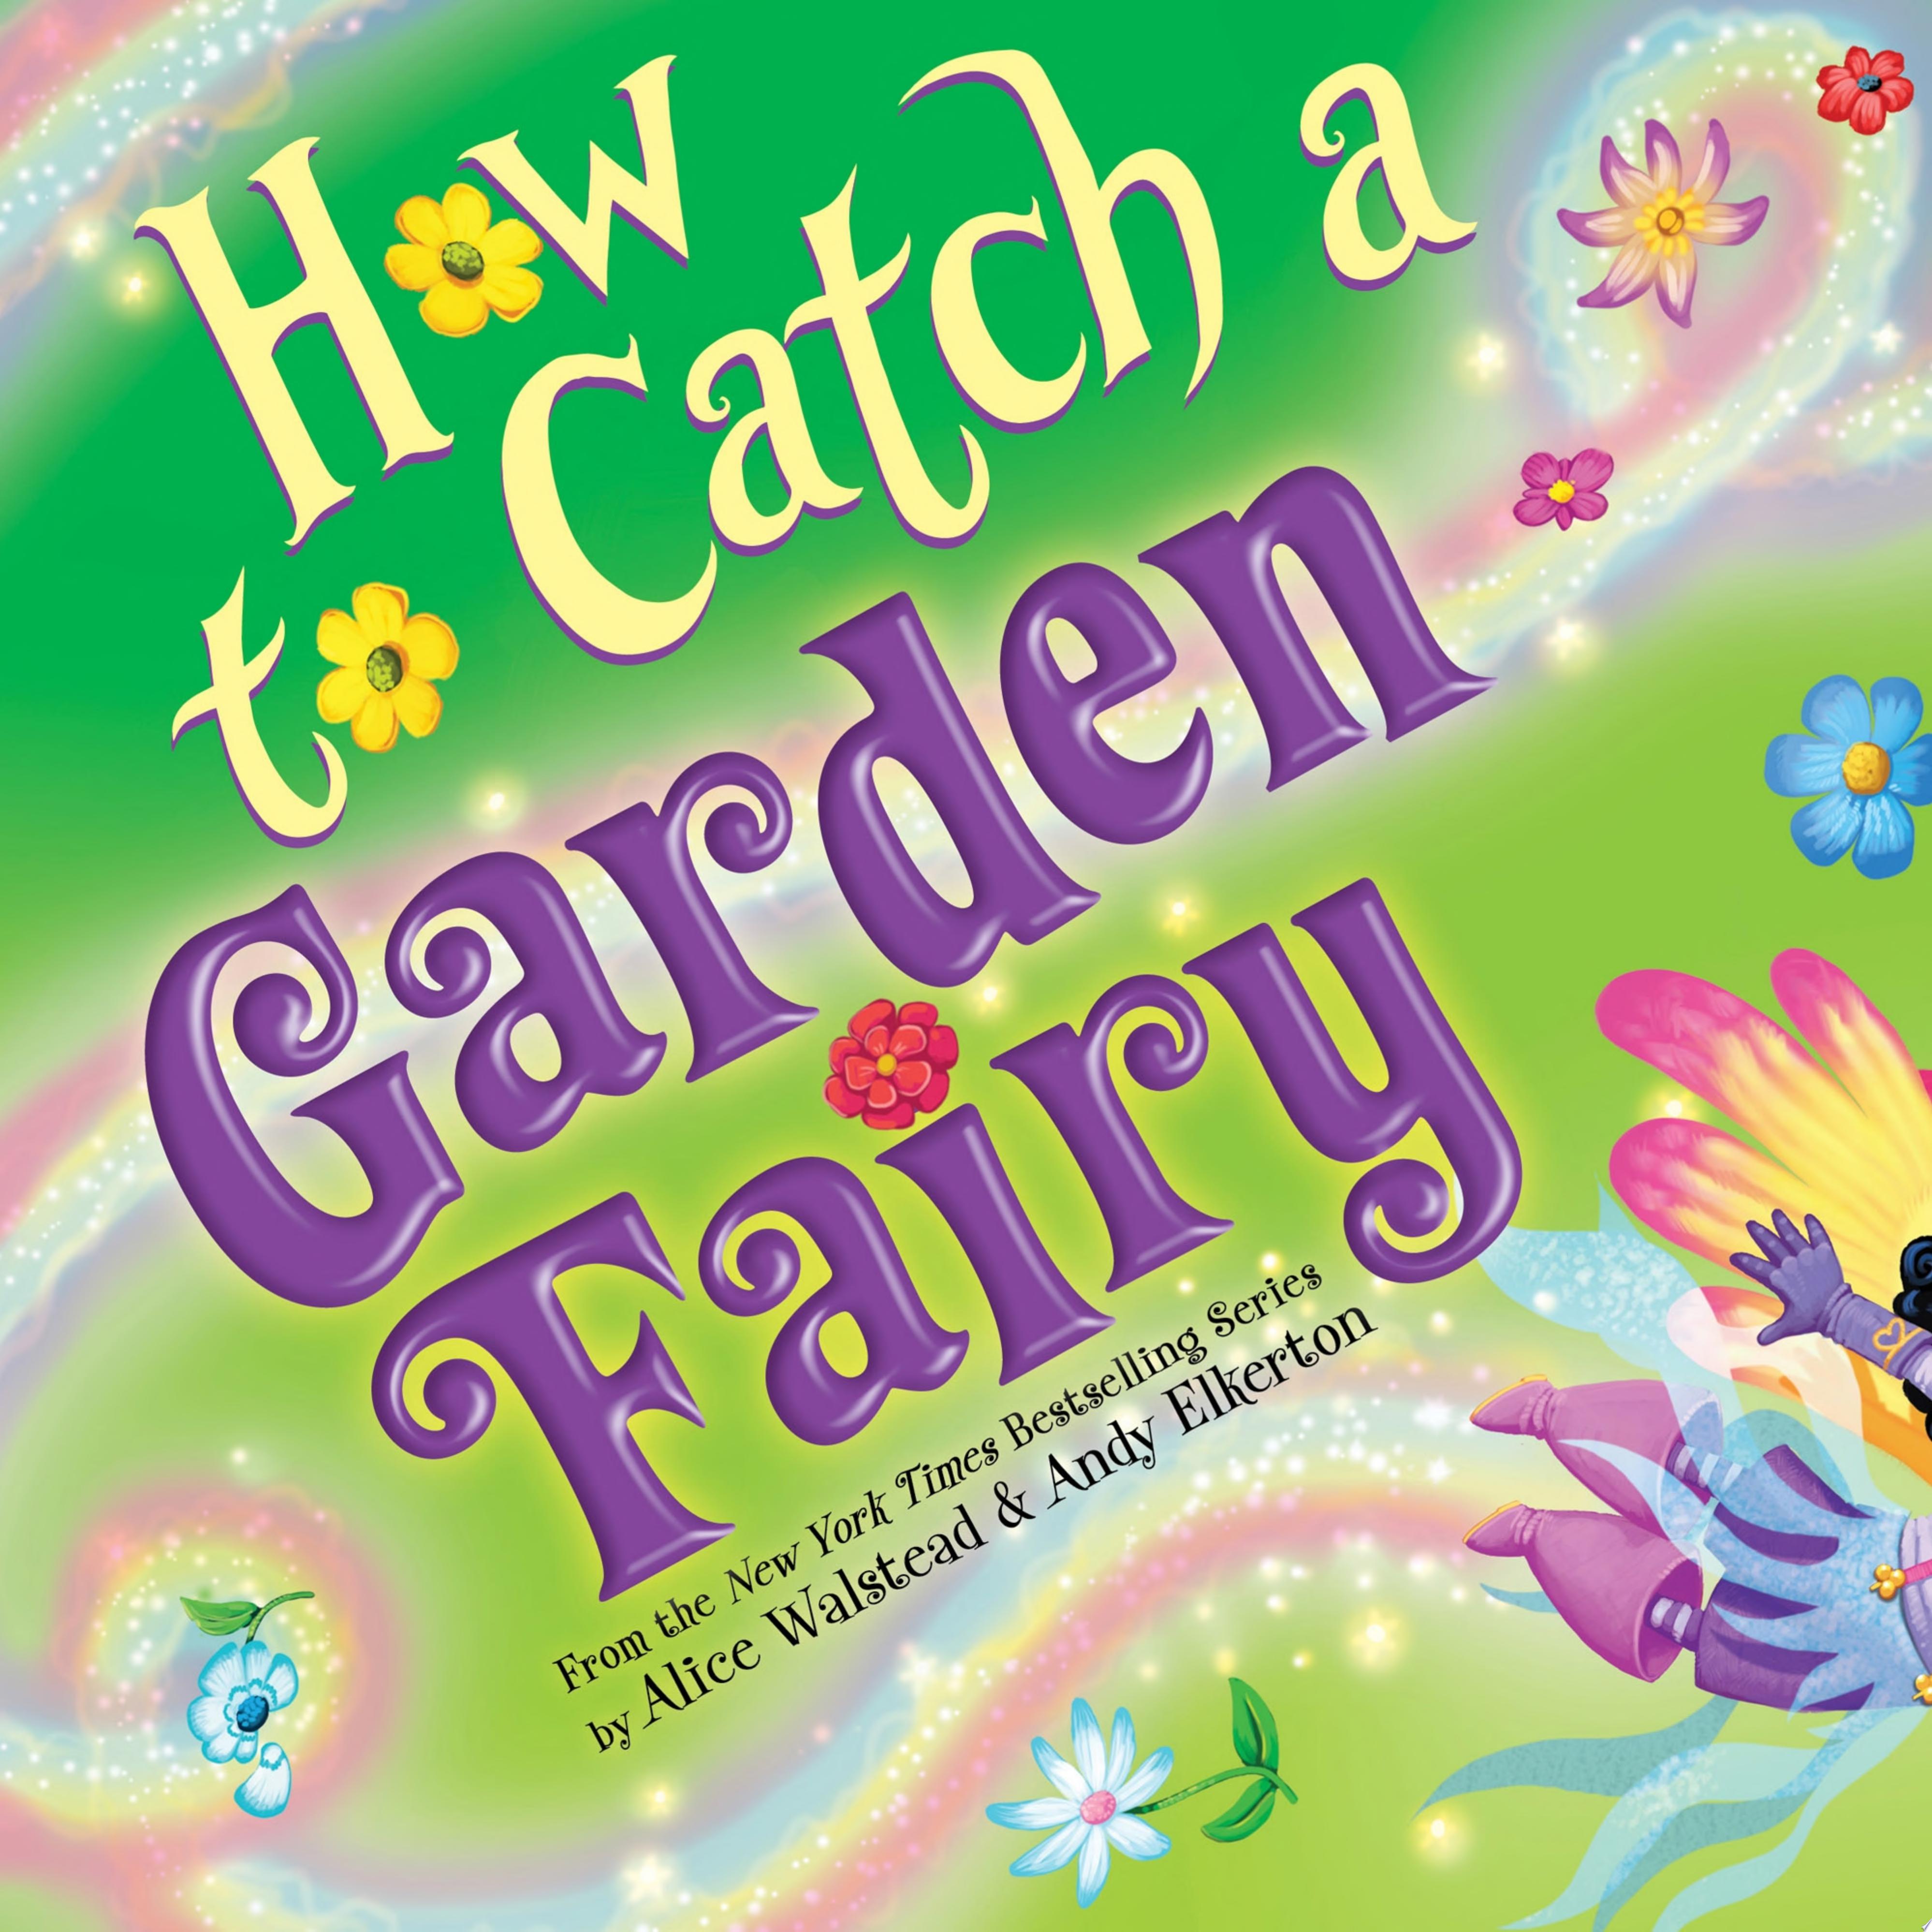 Image for "How to Catch a Garden Fairy"